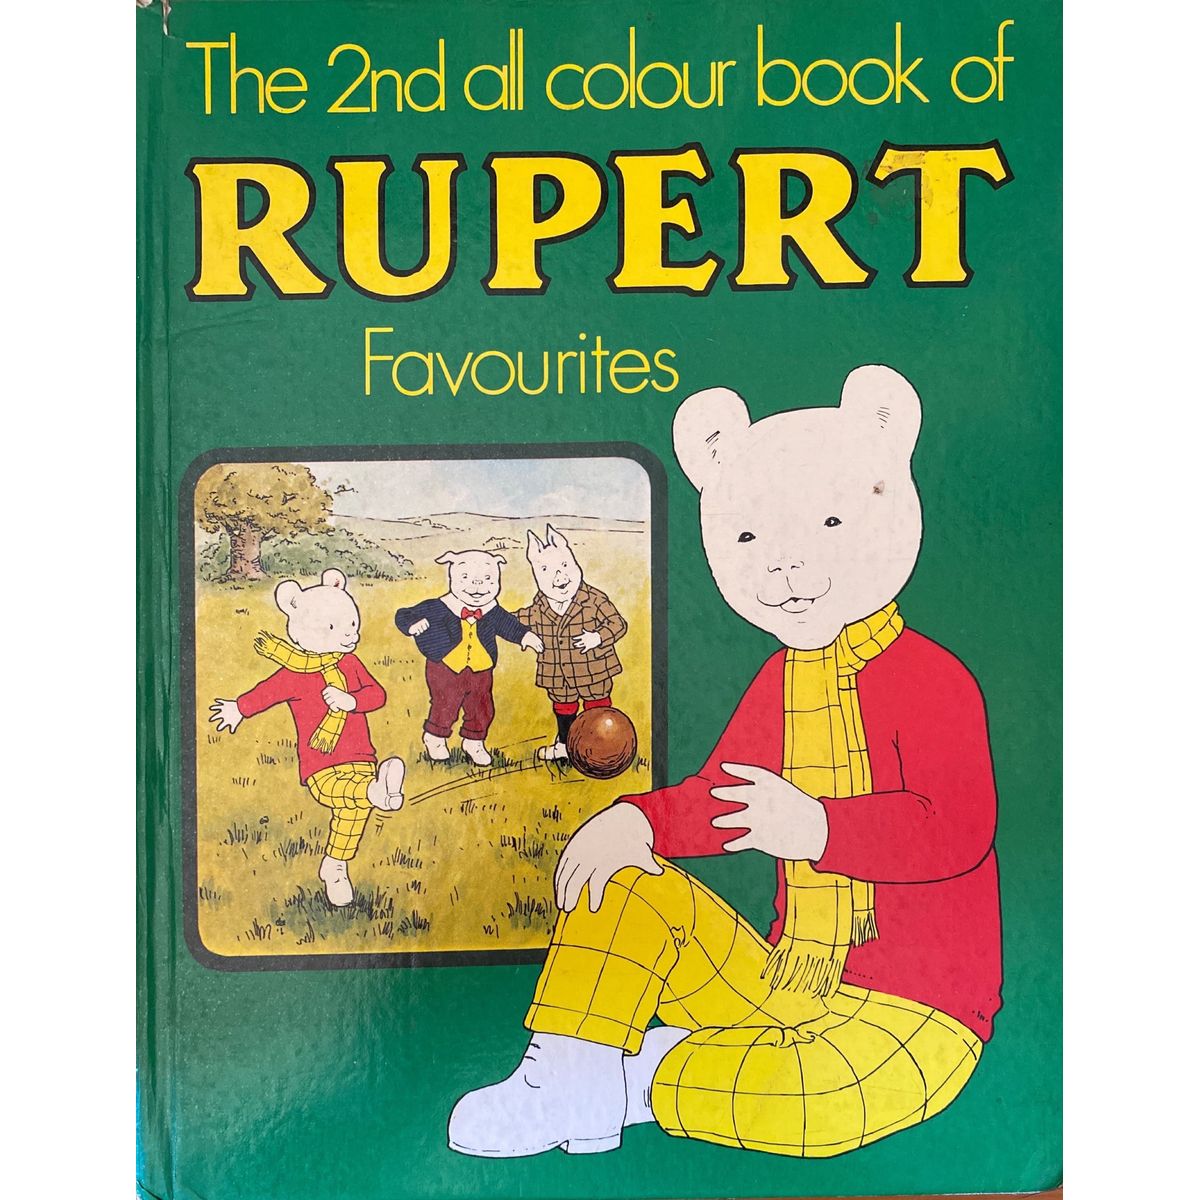 ISBN: 9780361045506 / 0361045506 - The 2nd All Colour Book of Rupert Favourites by Mary Tourtel [1978]